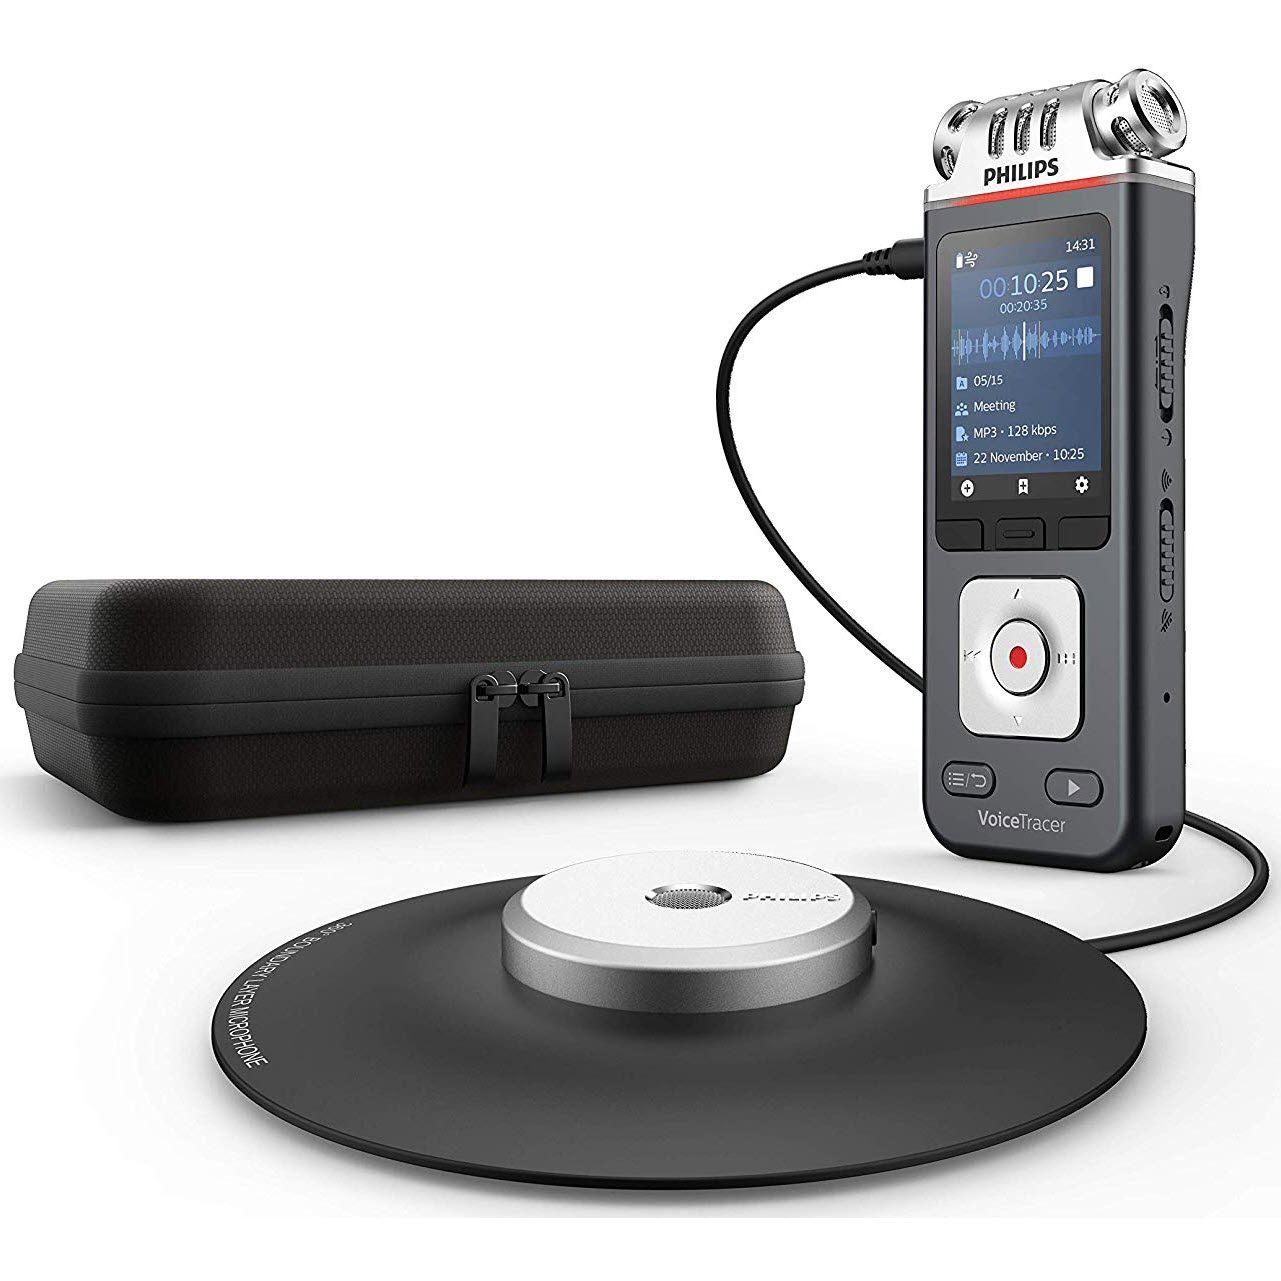 Philips DVT8110/00 VoiceTracer 8 GB Digital Meeting Recorder with 3 high-fidelity microphones and 360° Meeting Microphone